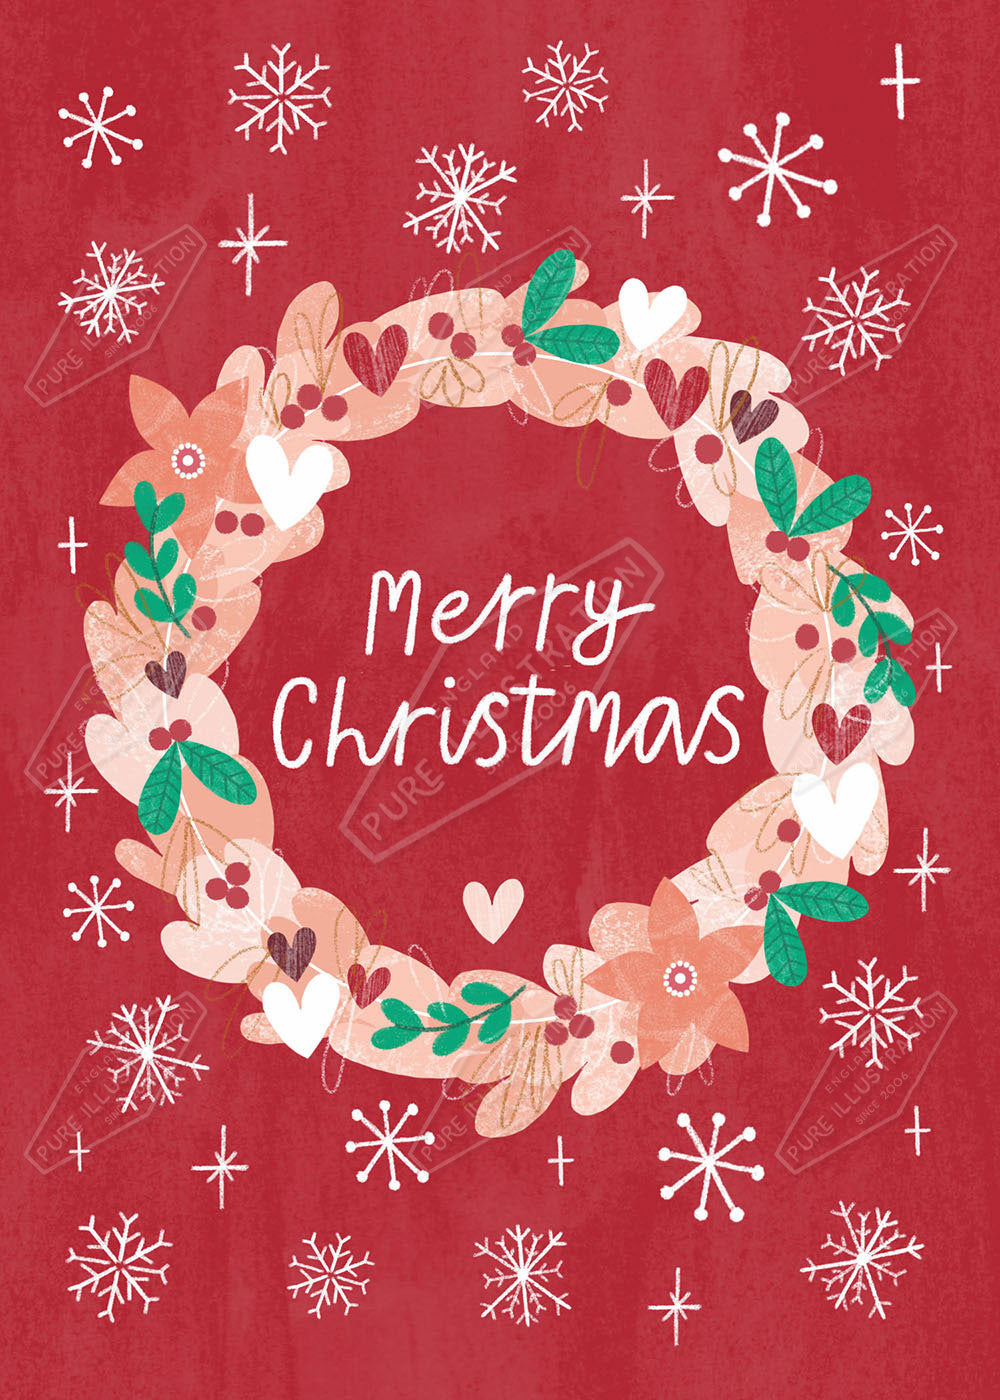 00034994LBR- Leah Brideaux is represented by Pure Art Licensing Agency - Christmas Greeting Card Design